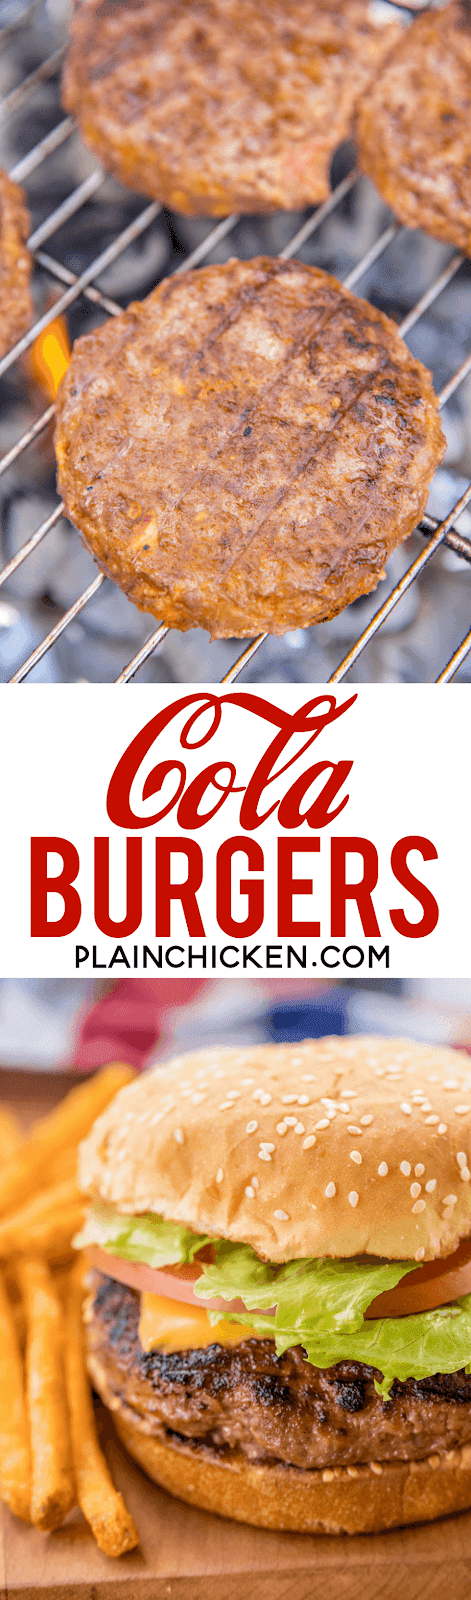 Cola Burgers - seriously delicious!! Ground beef, coke, French dressing, saltine crackers, and parmesan cheese. Top with your favorite cheese!! Can make patties ahead of time and freeze for later. Great for all your cookouts and tailgates! YUM! #burgers #grilling #tailgating #cookout